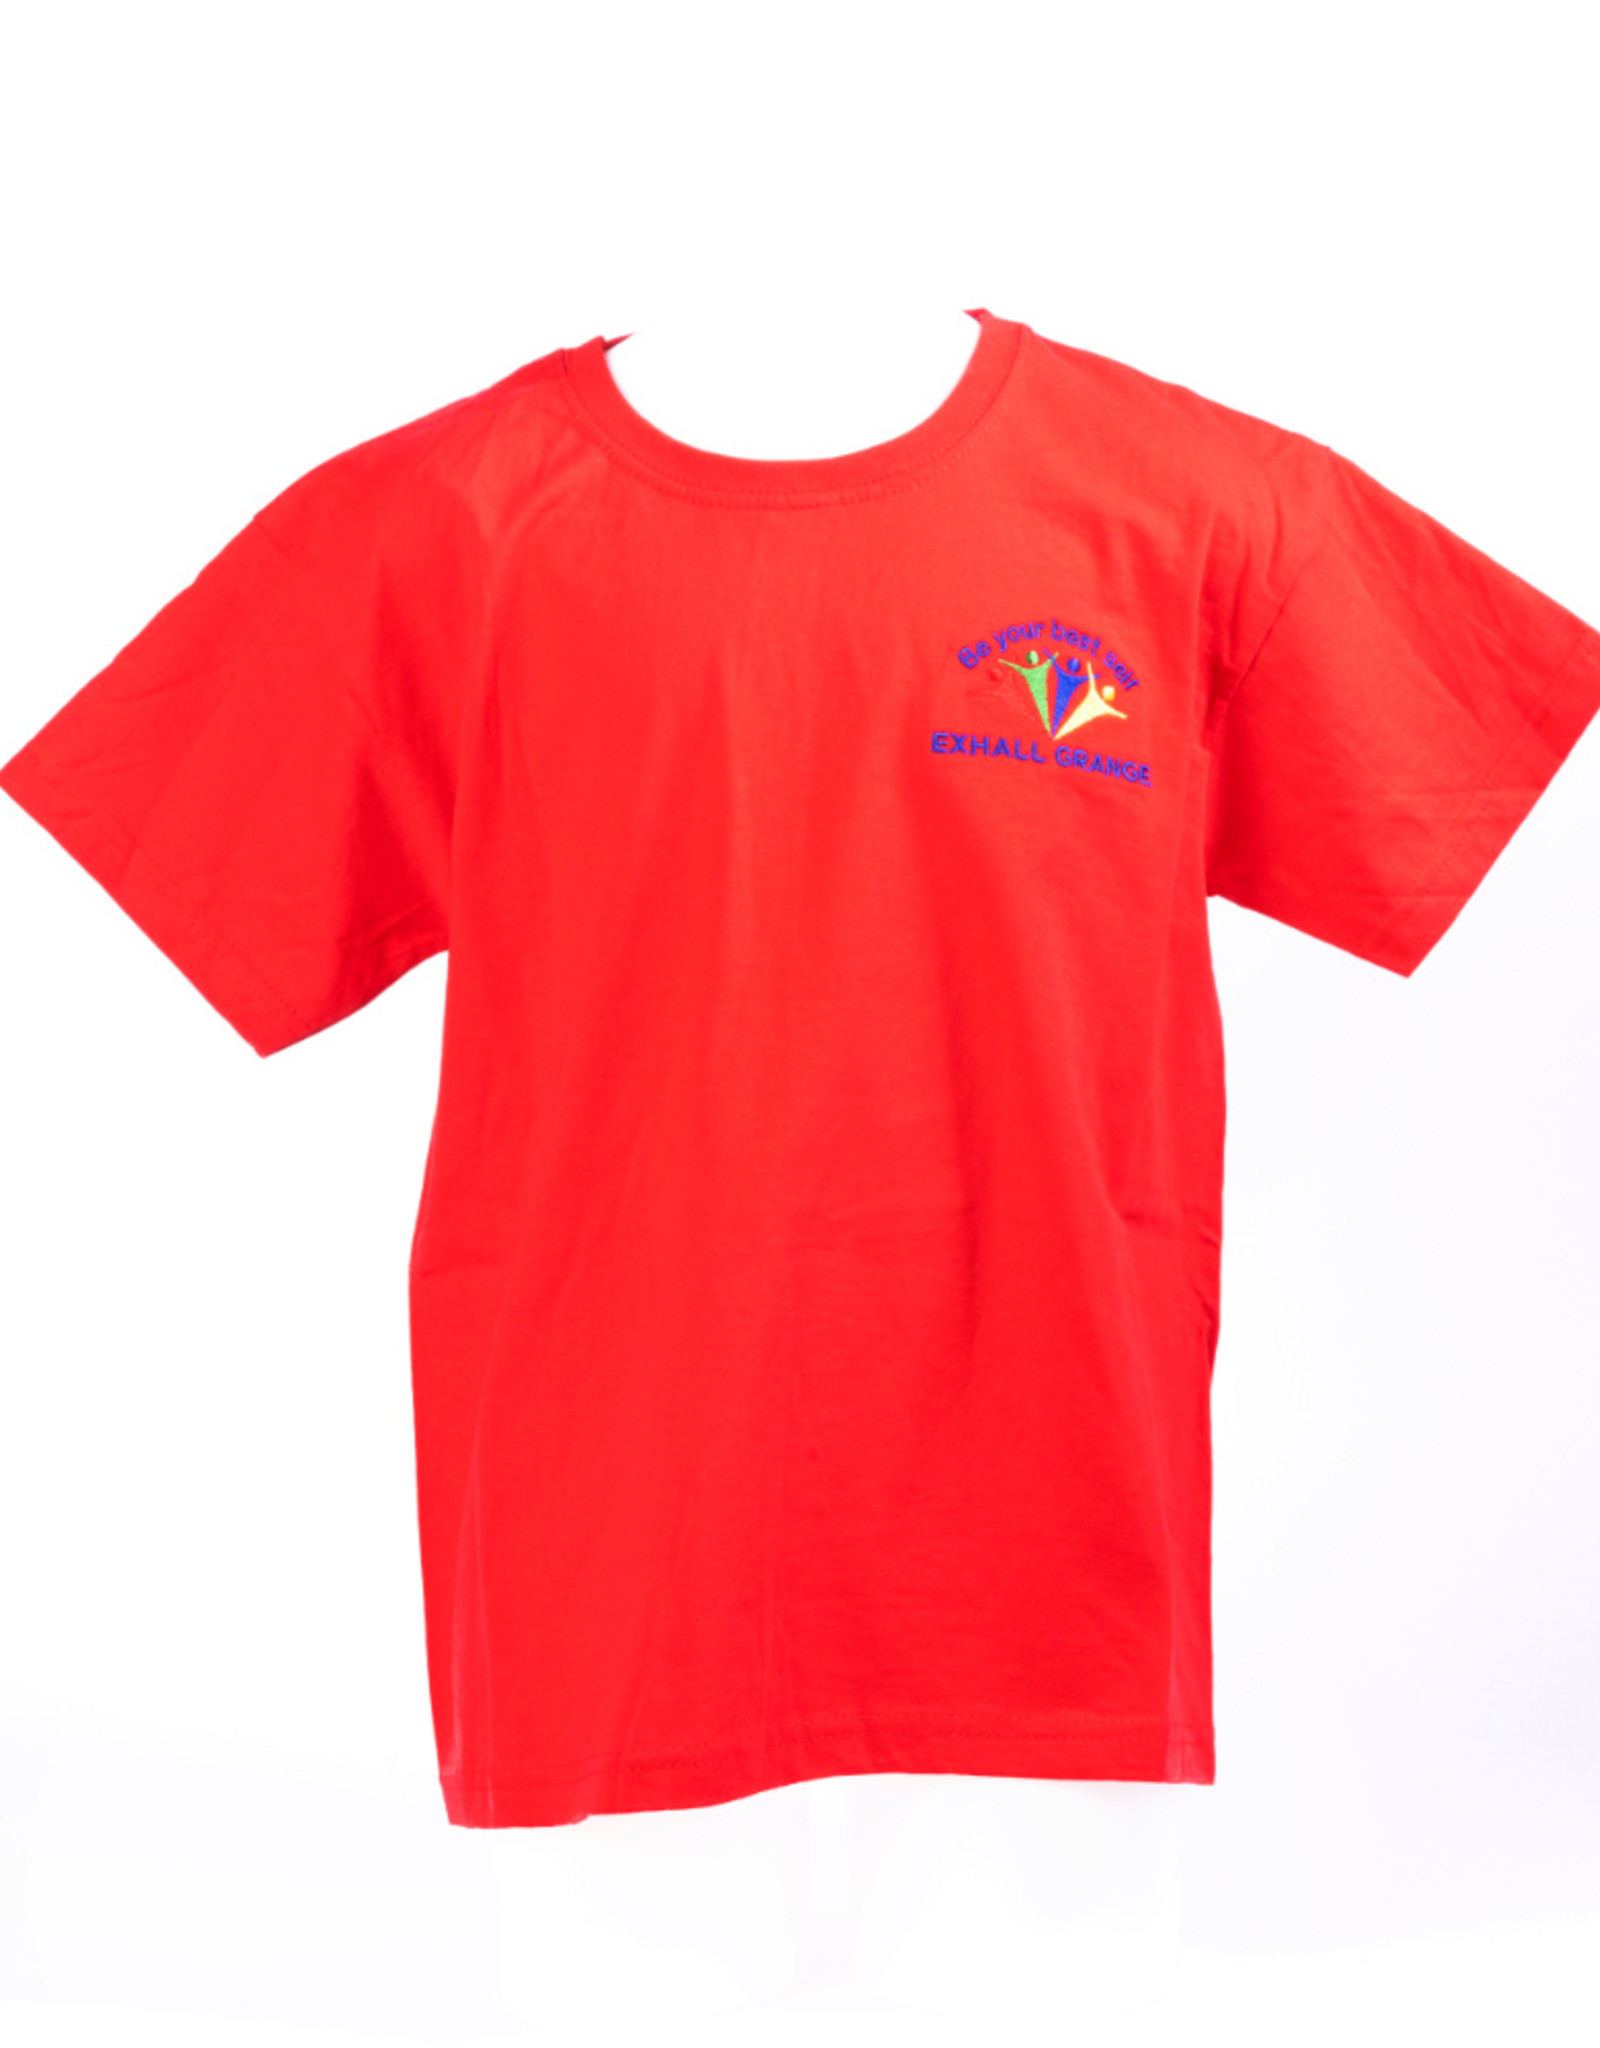 FRUIT OF THE LOOM P.E T-Shirt Primary Child Size - Exhall Grange